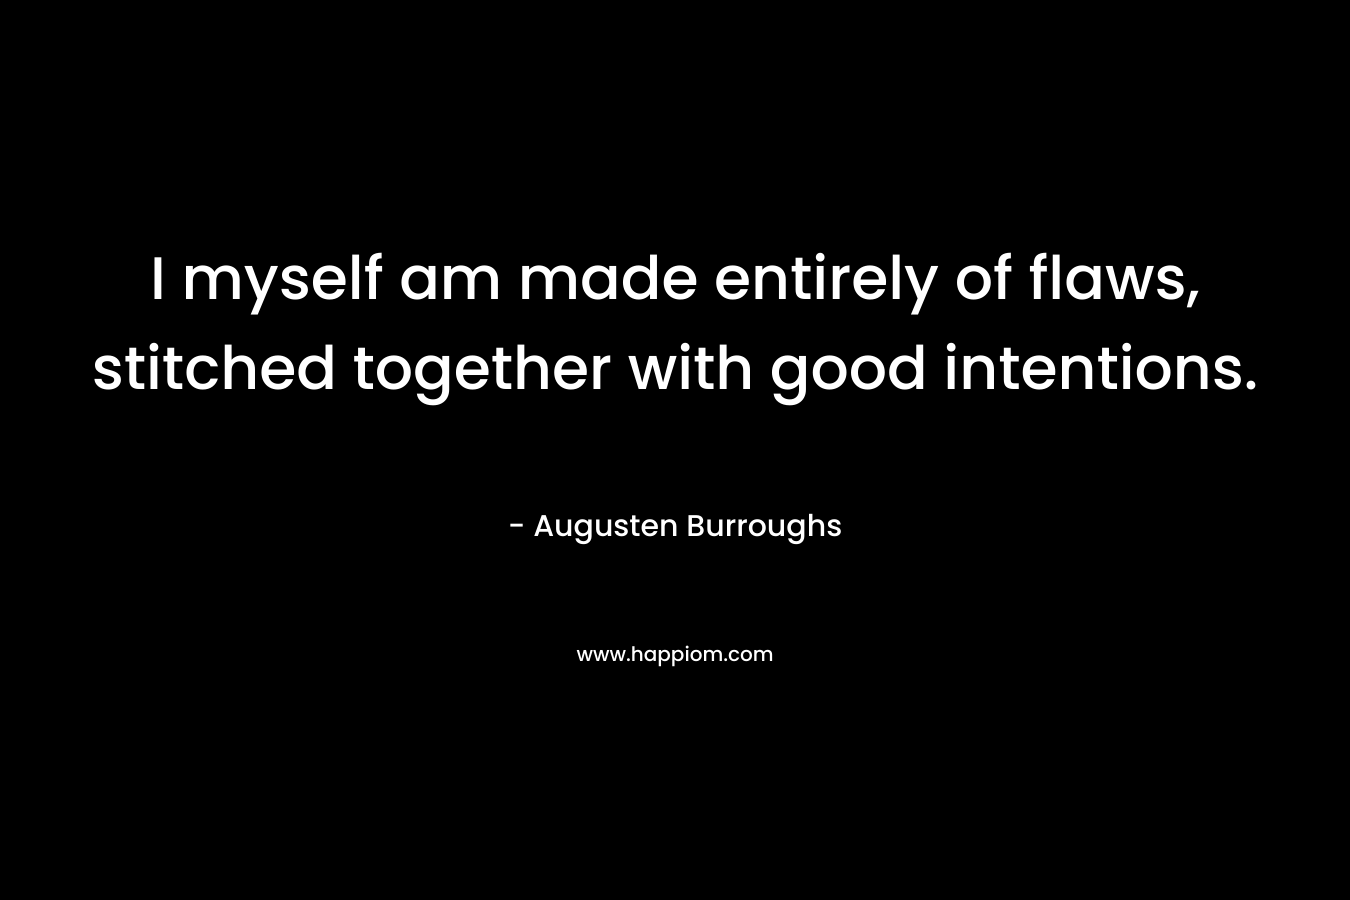 I myself am made entirely of flaws, stitched together with good intentions. – Augusten Burroughs